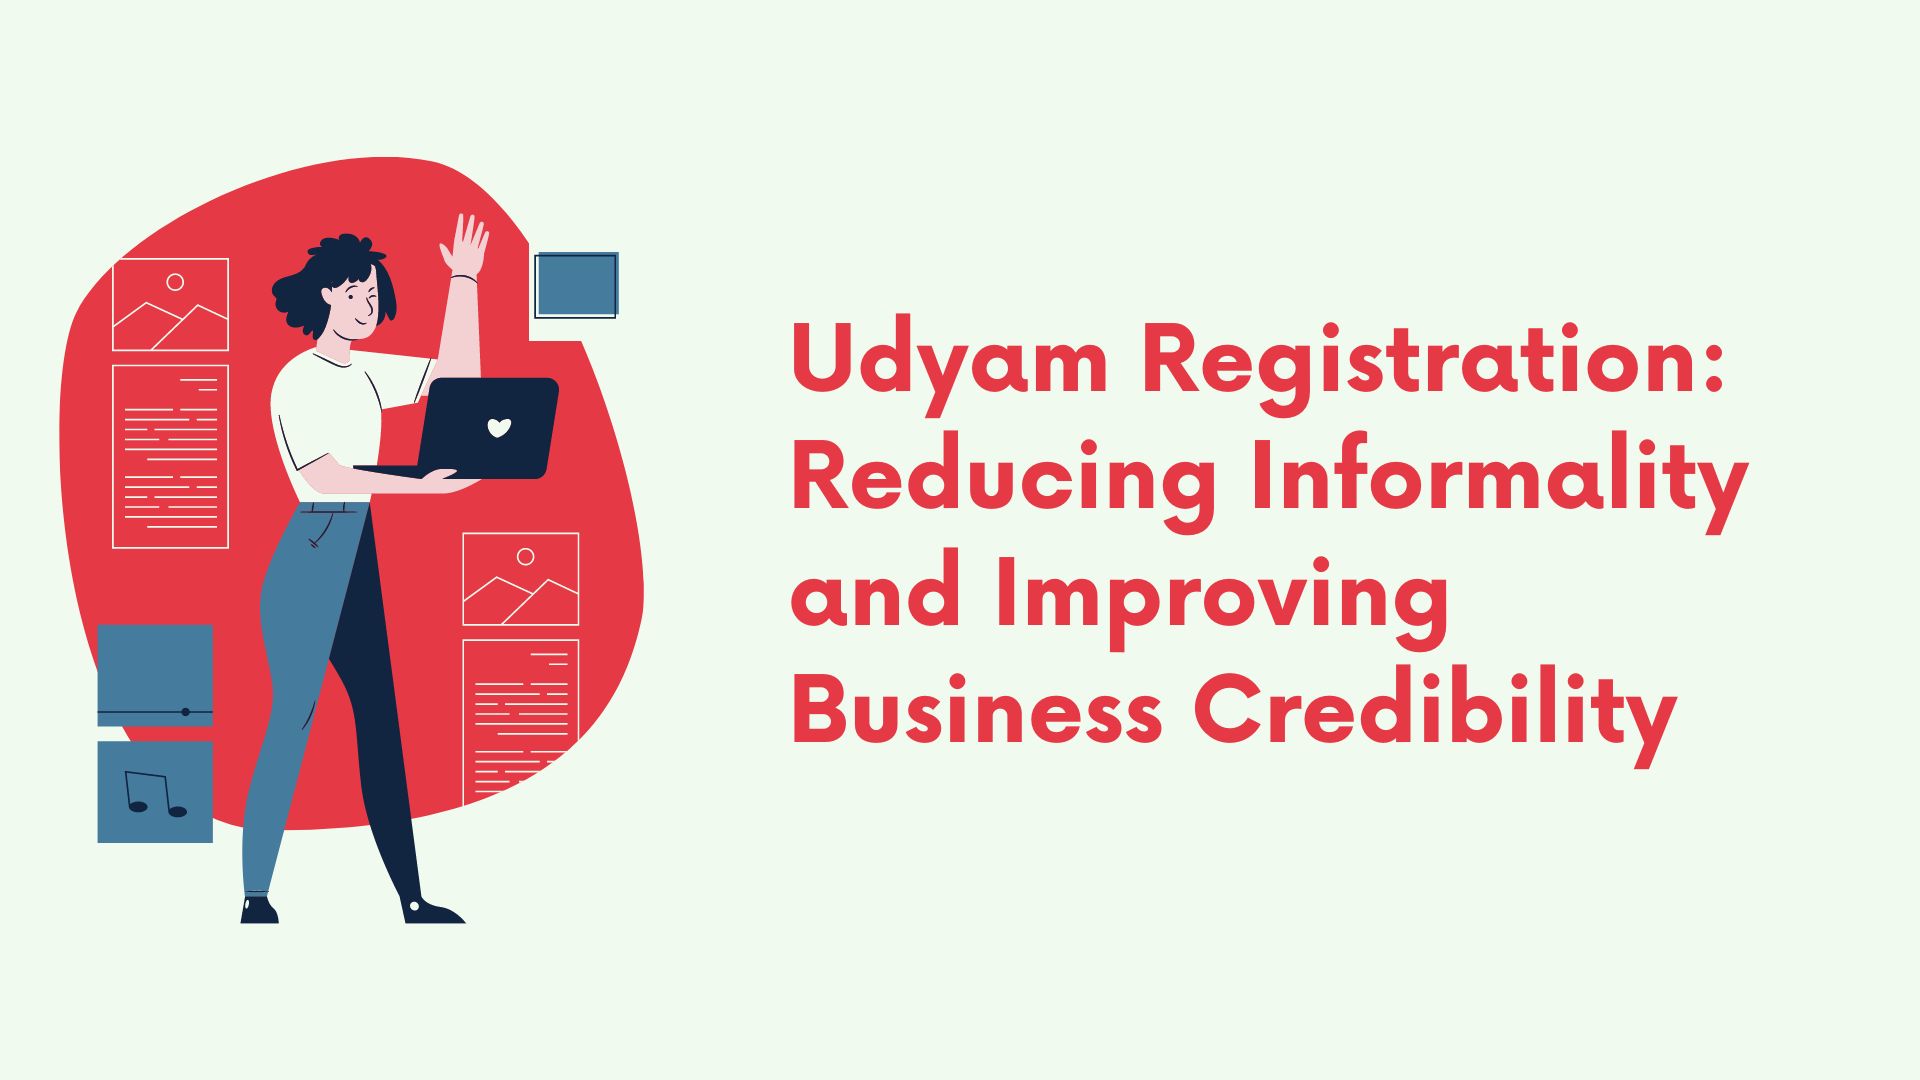 Udyam Registration: Reducing Informality and Improving Business Credibility